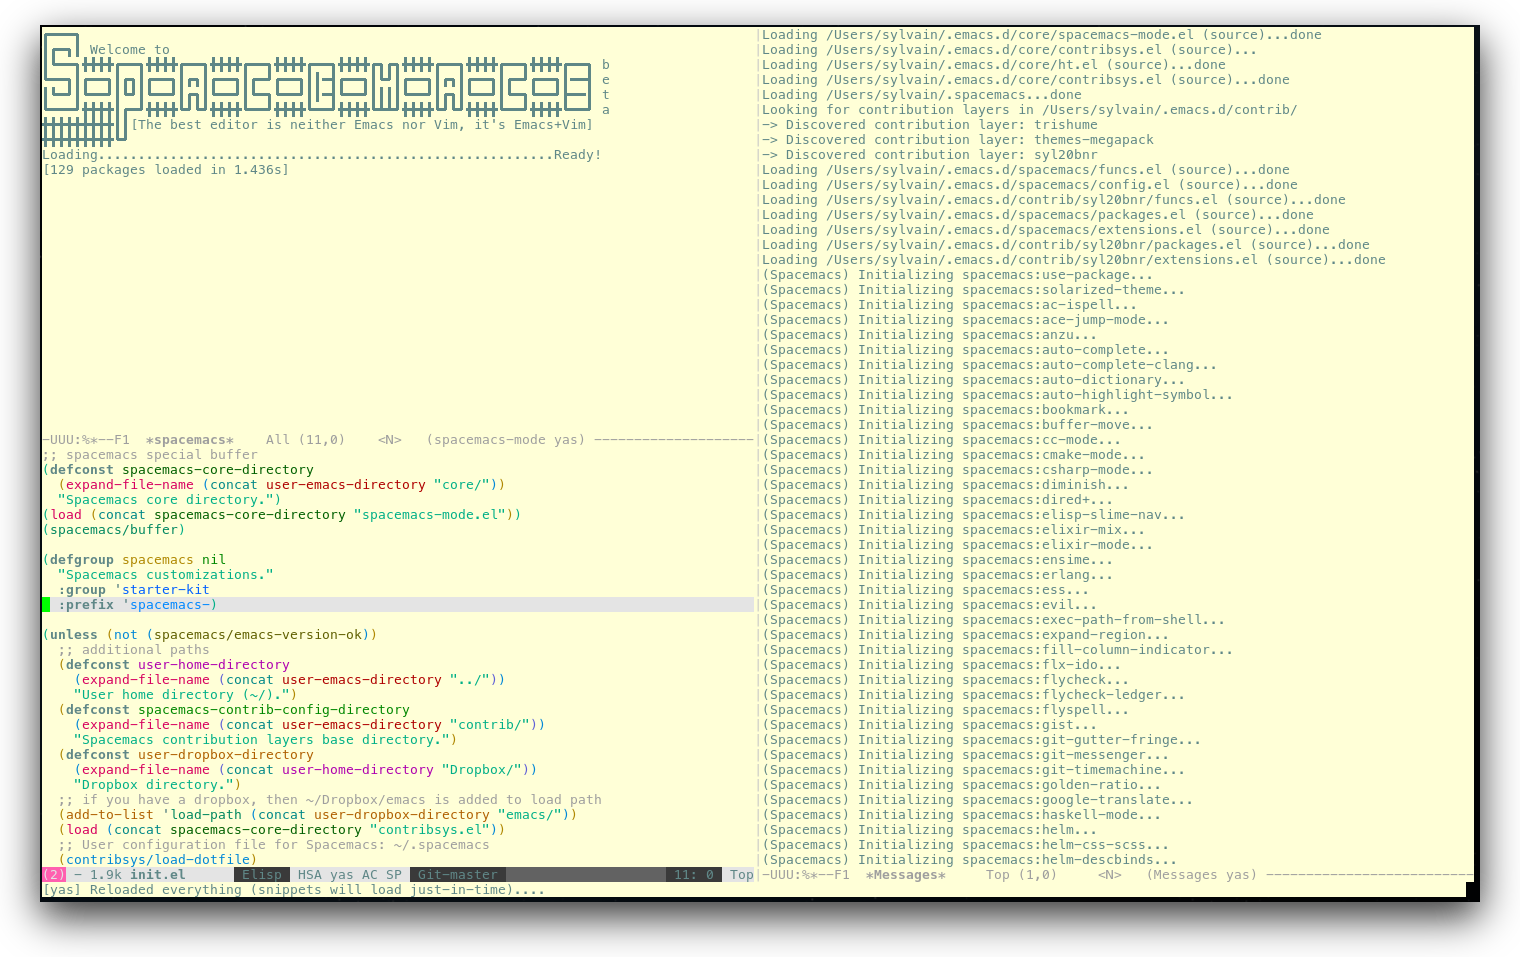 /TakeV/spacemacs/media/commit/1c61e35e93281ec0ebf48a45dc8511eef0c89d0d/doc/img/spacemacs-urxvt.png